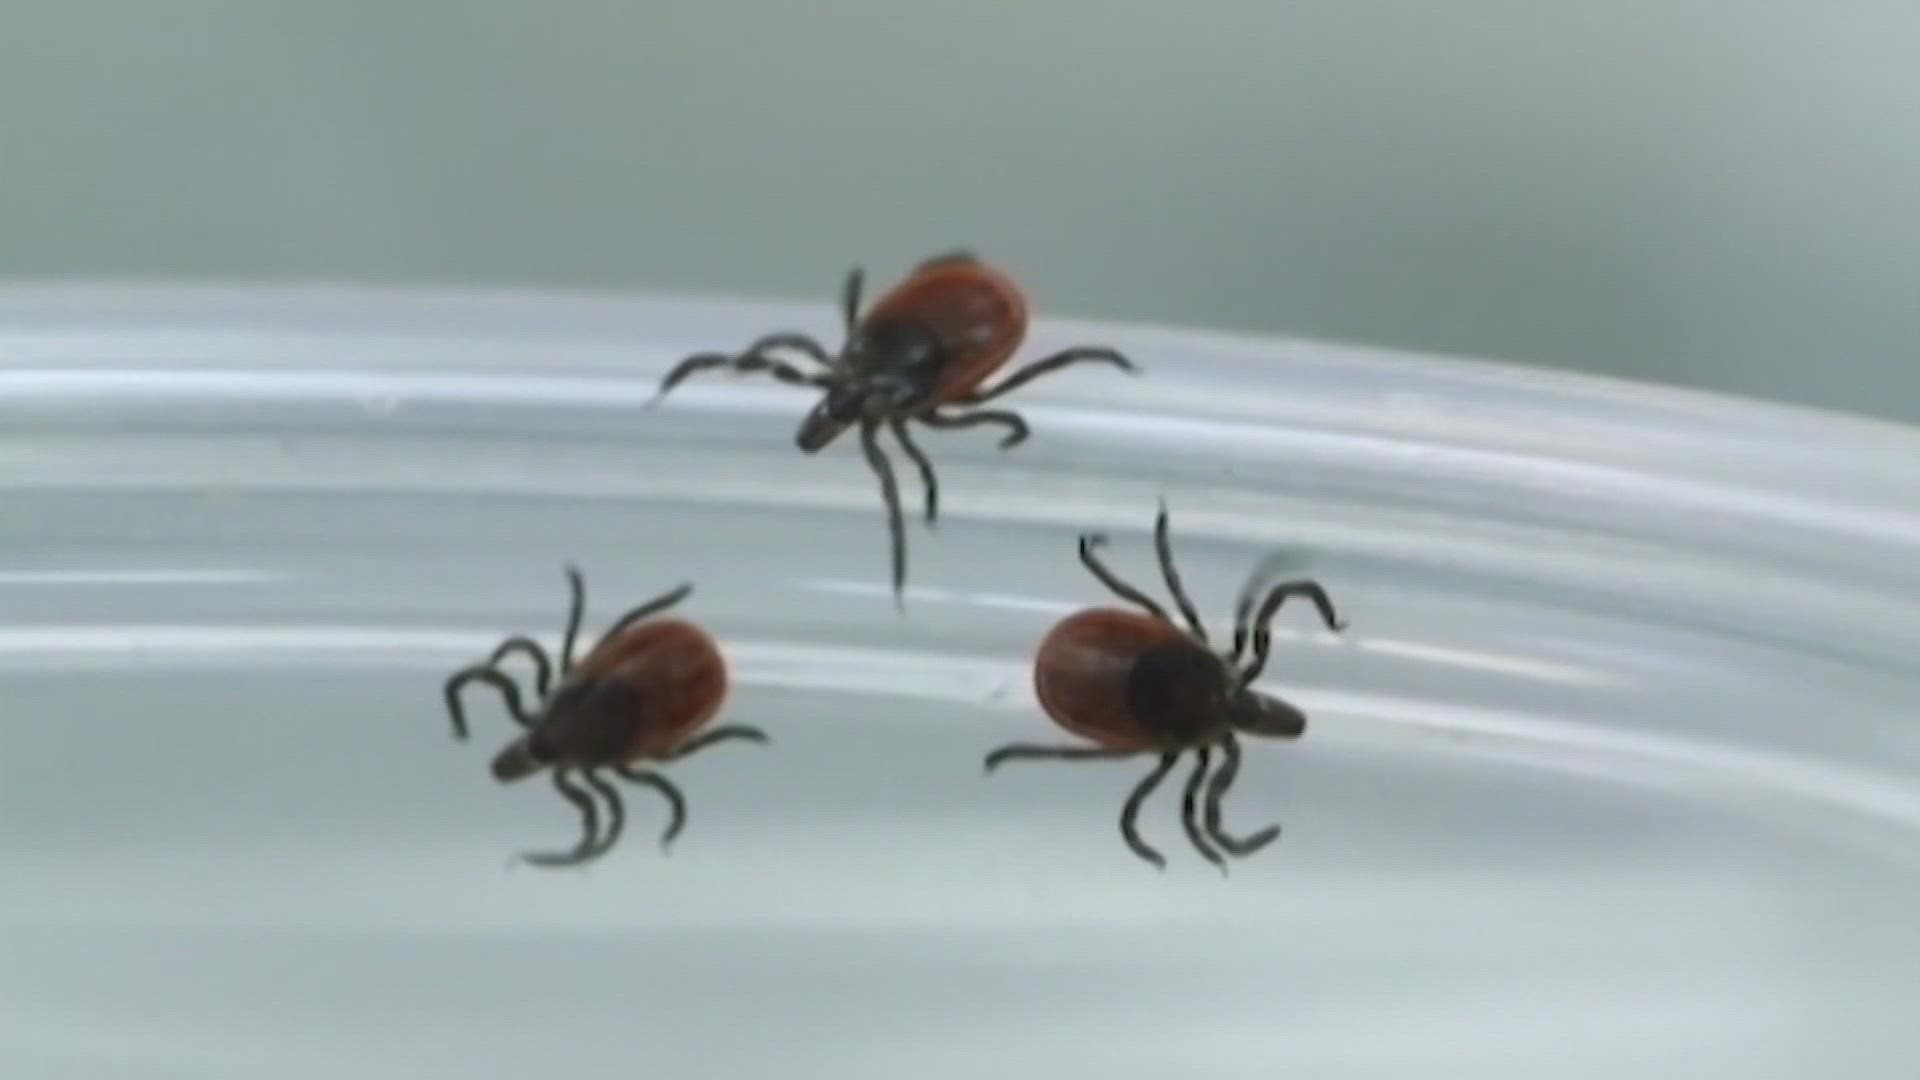 Pfizer and researchers at Virginia Commonwealth University are developing a shot against Lyme disease.